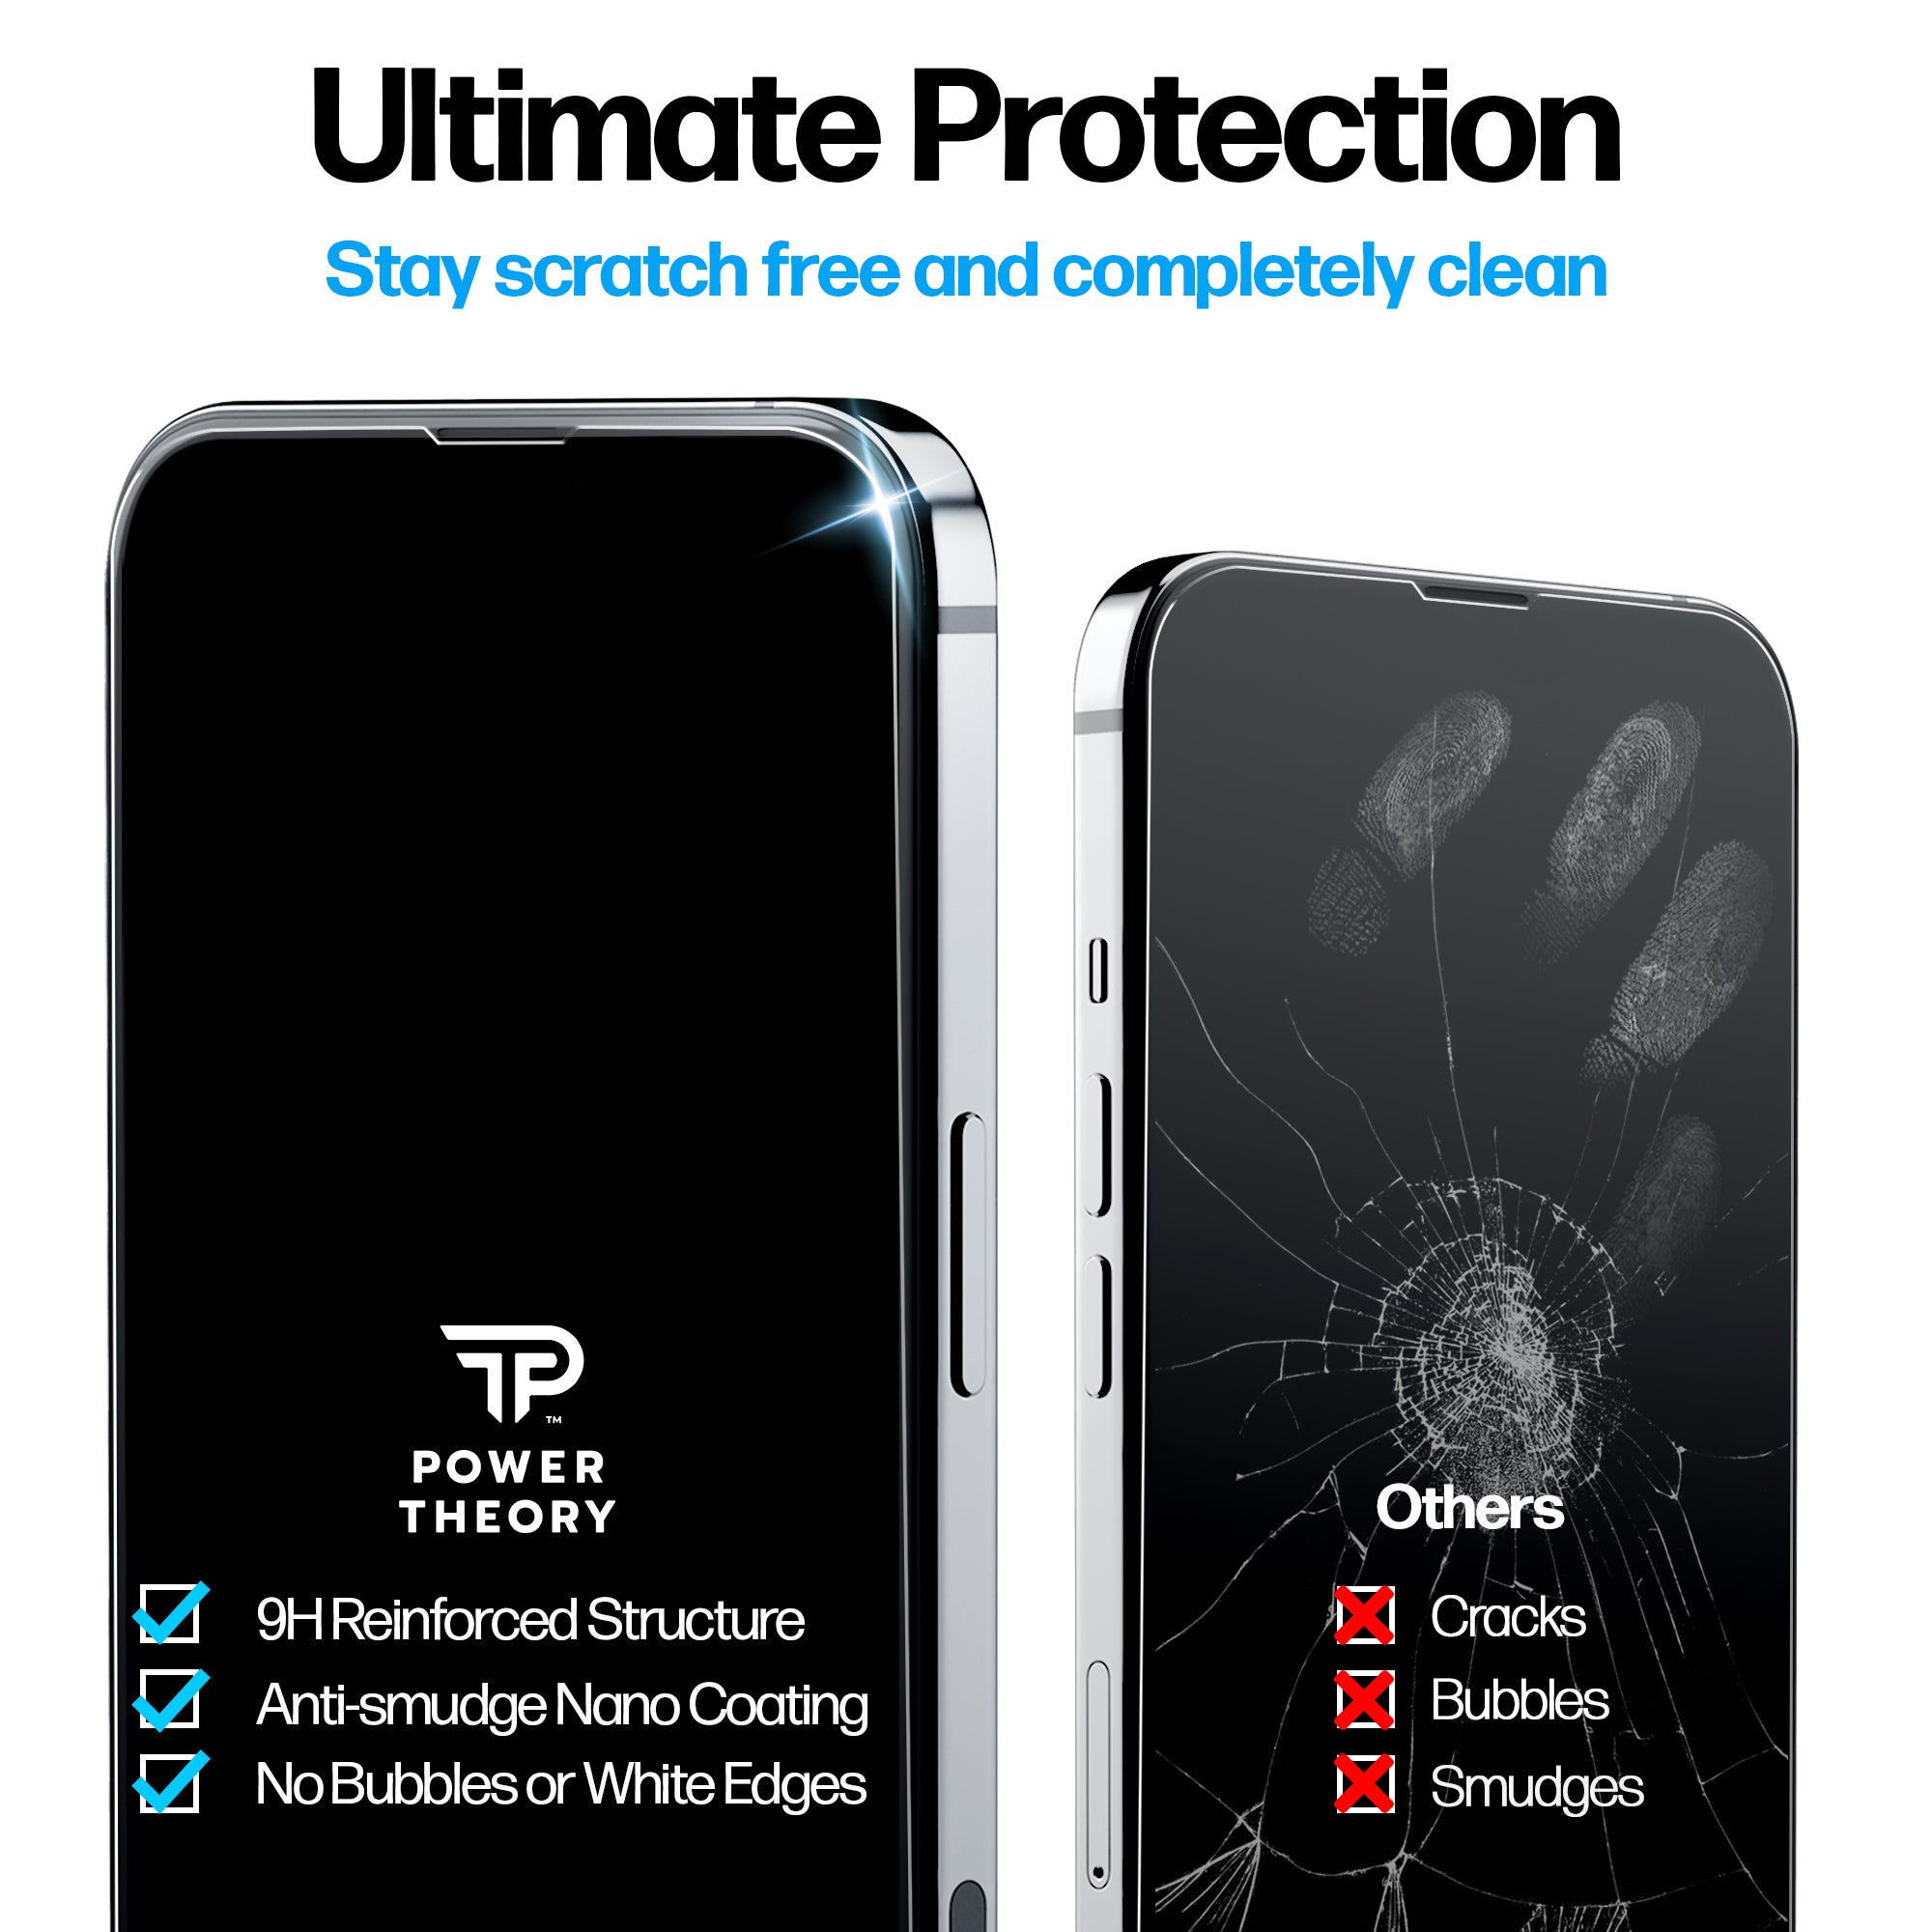 iPhone 14 Pro Max Tempered Glass Screen Protector [2-Pack]